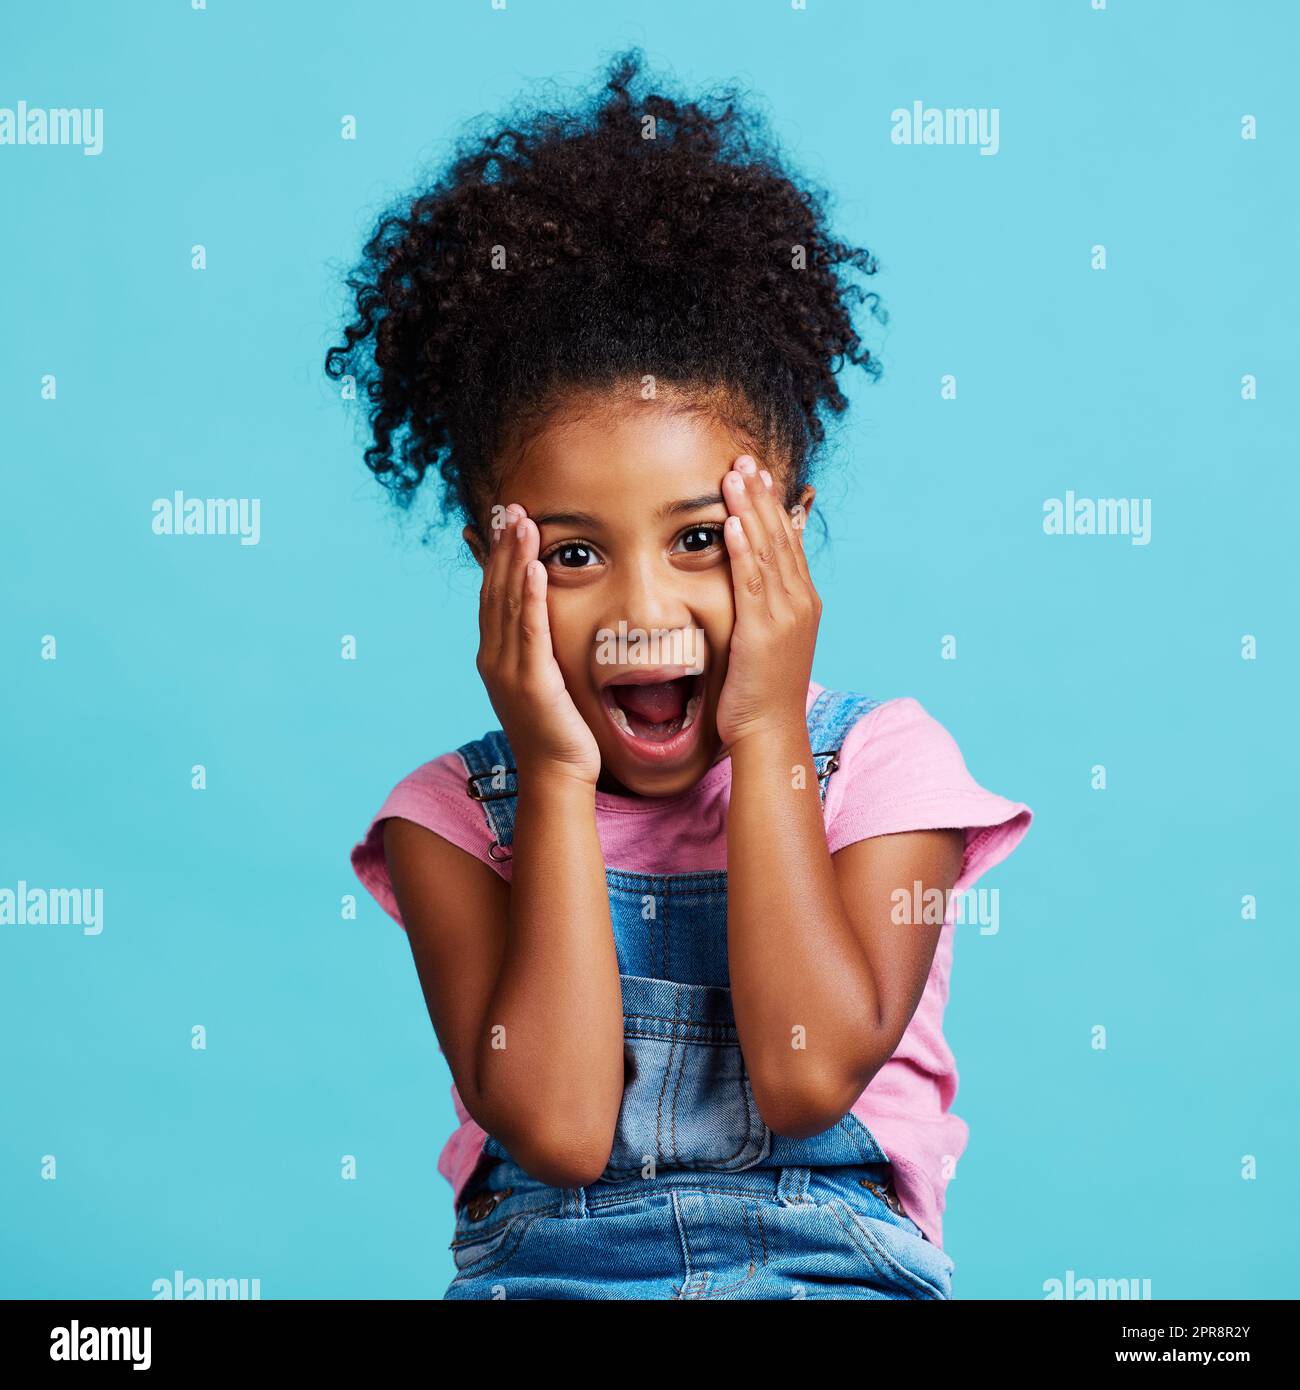 Im losing it. a little girl looking surprised while posing against a blue background. Stock Photo